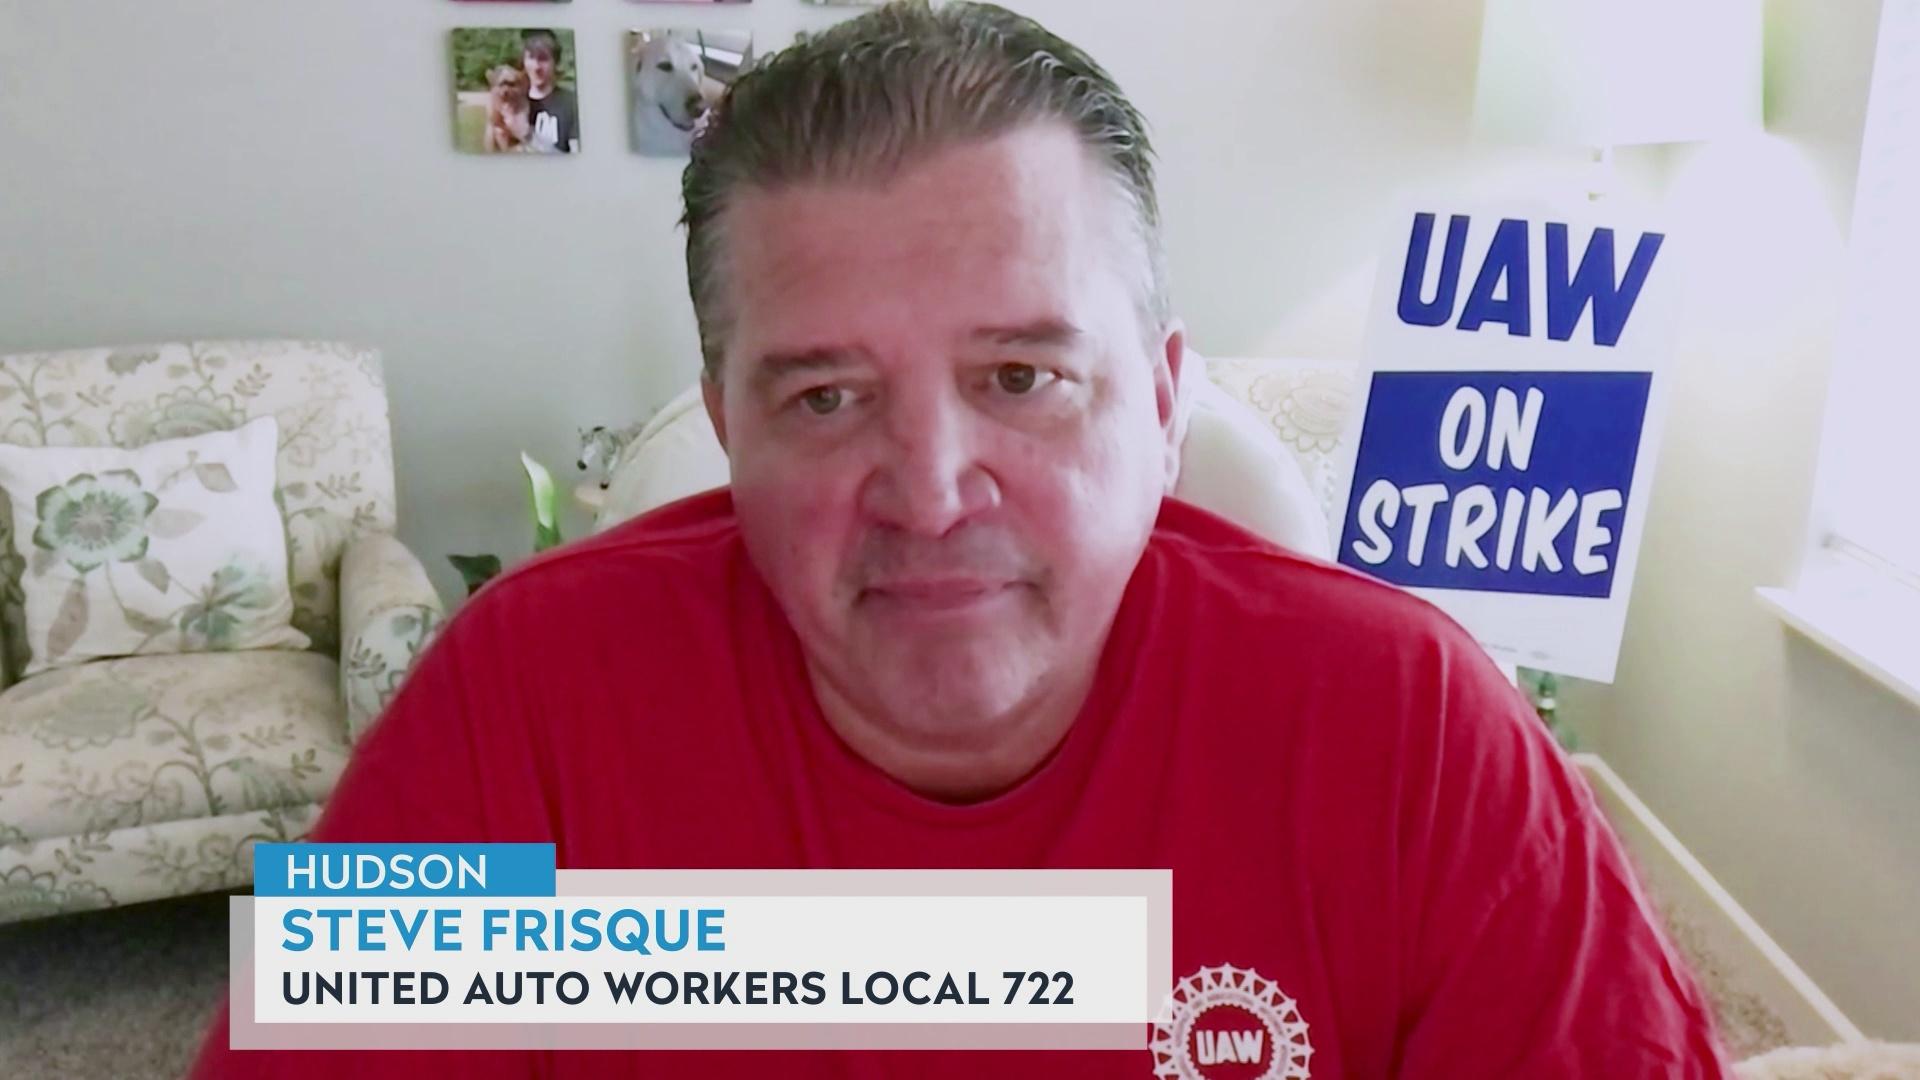 Steve Frisque on the UAW strike and American labor movement